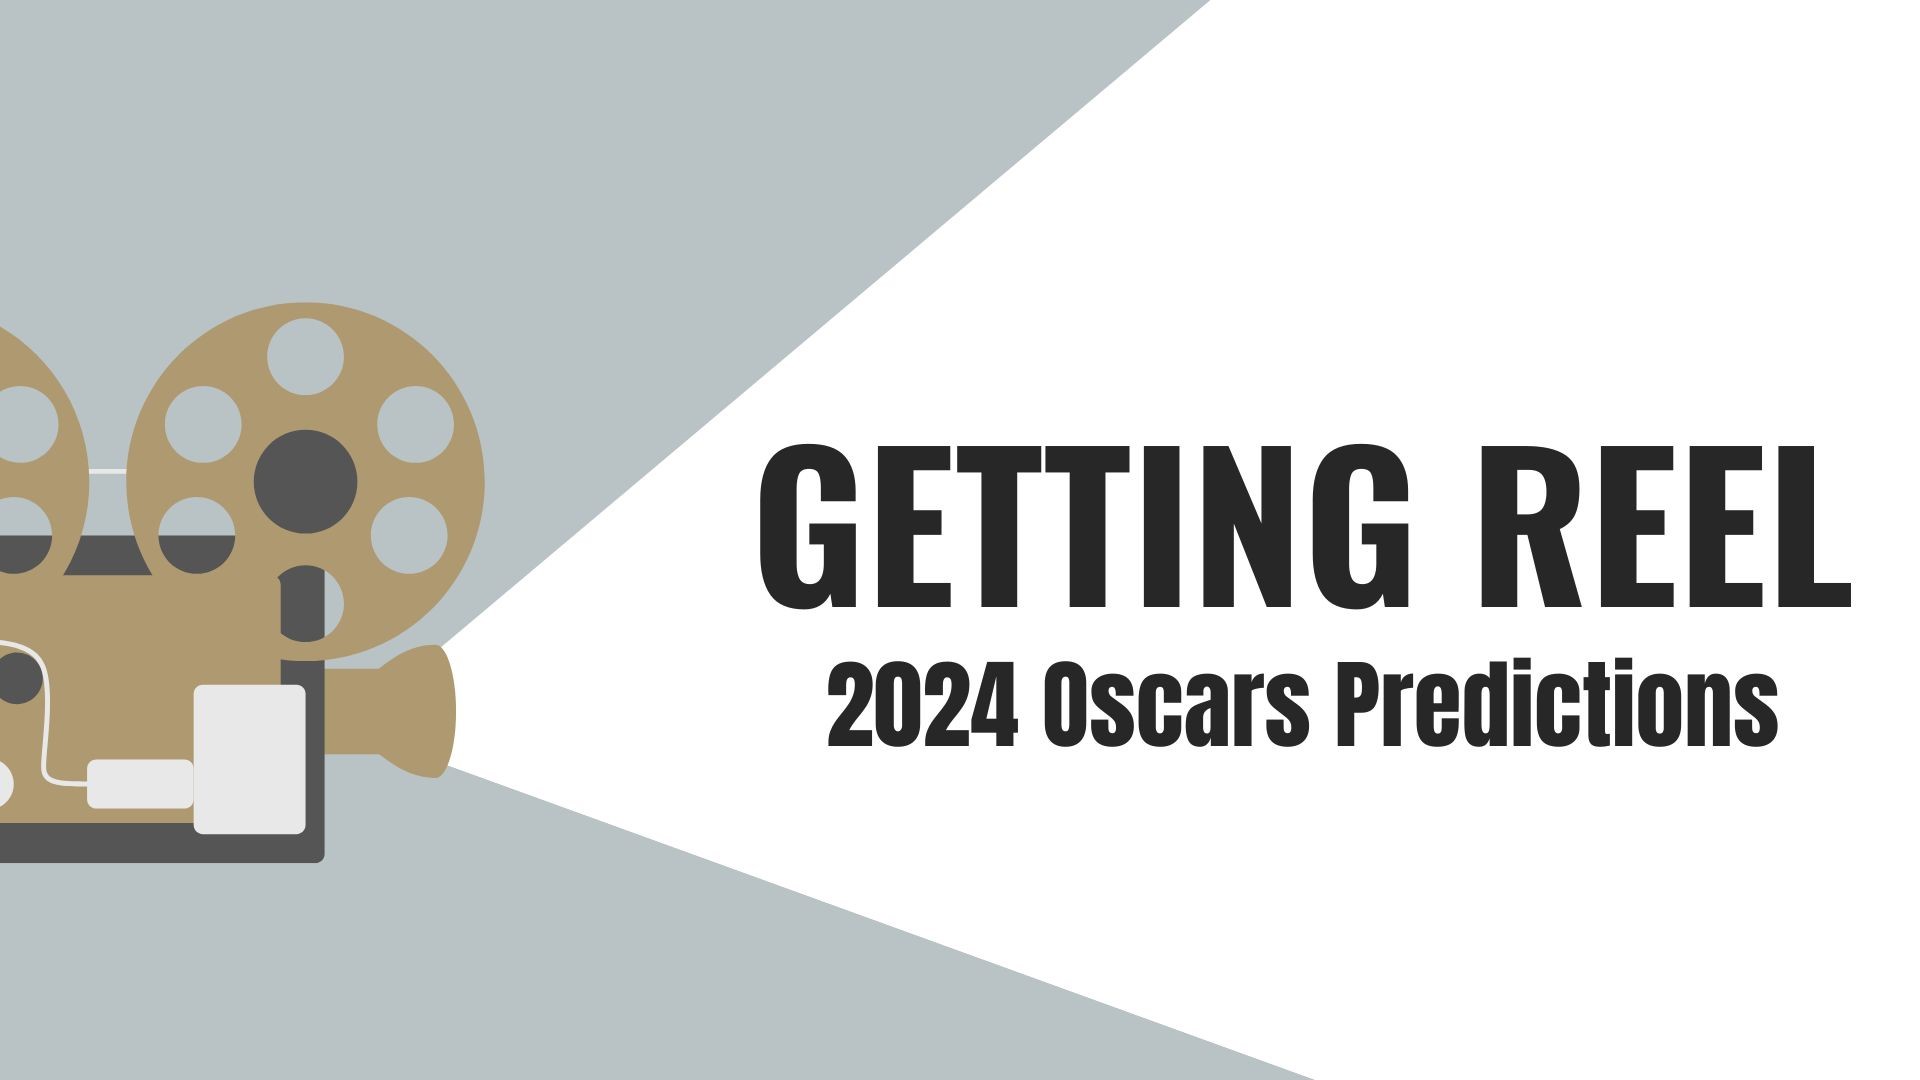 KTHV movie reviewers make their predictions for the 2024 Oscars. They discuss who the winners will be, as well as some of the snubs for this year's awards.